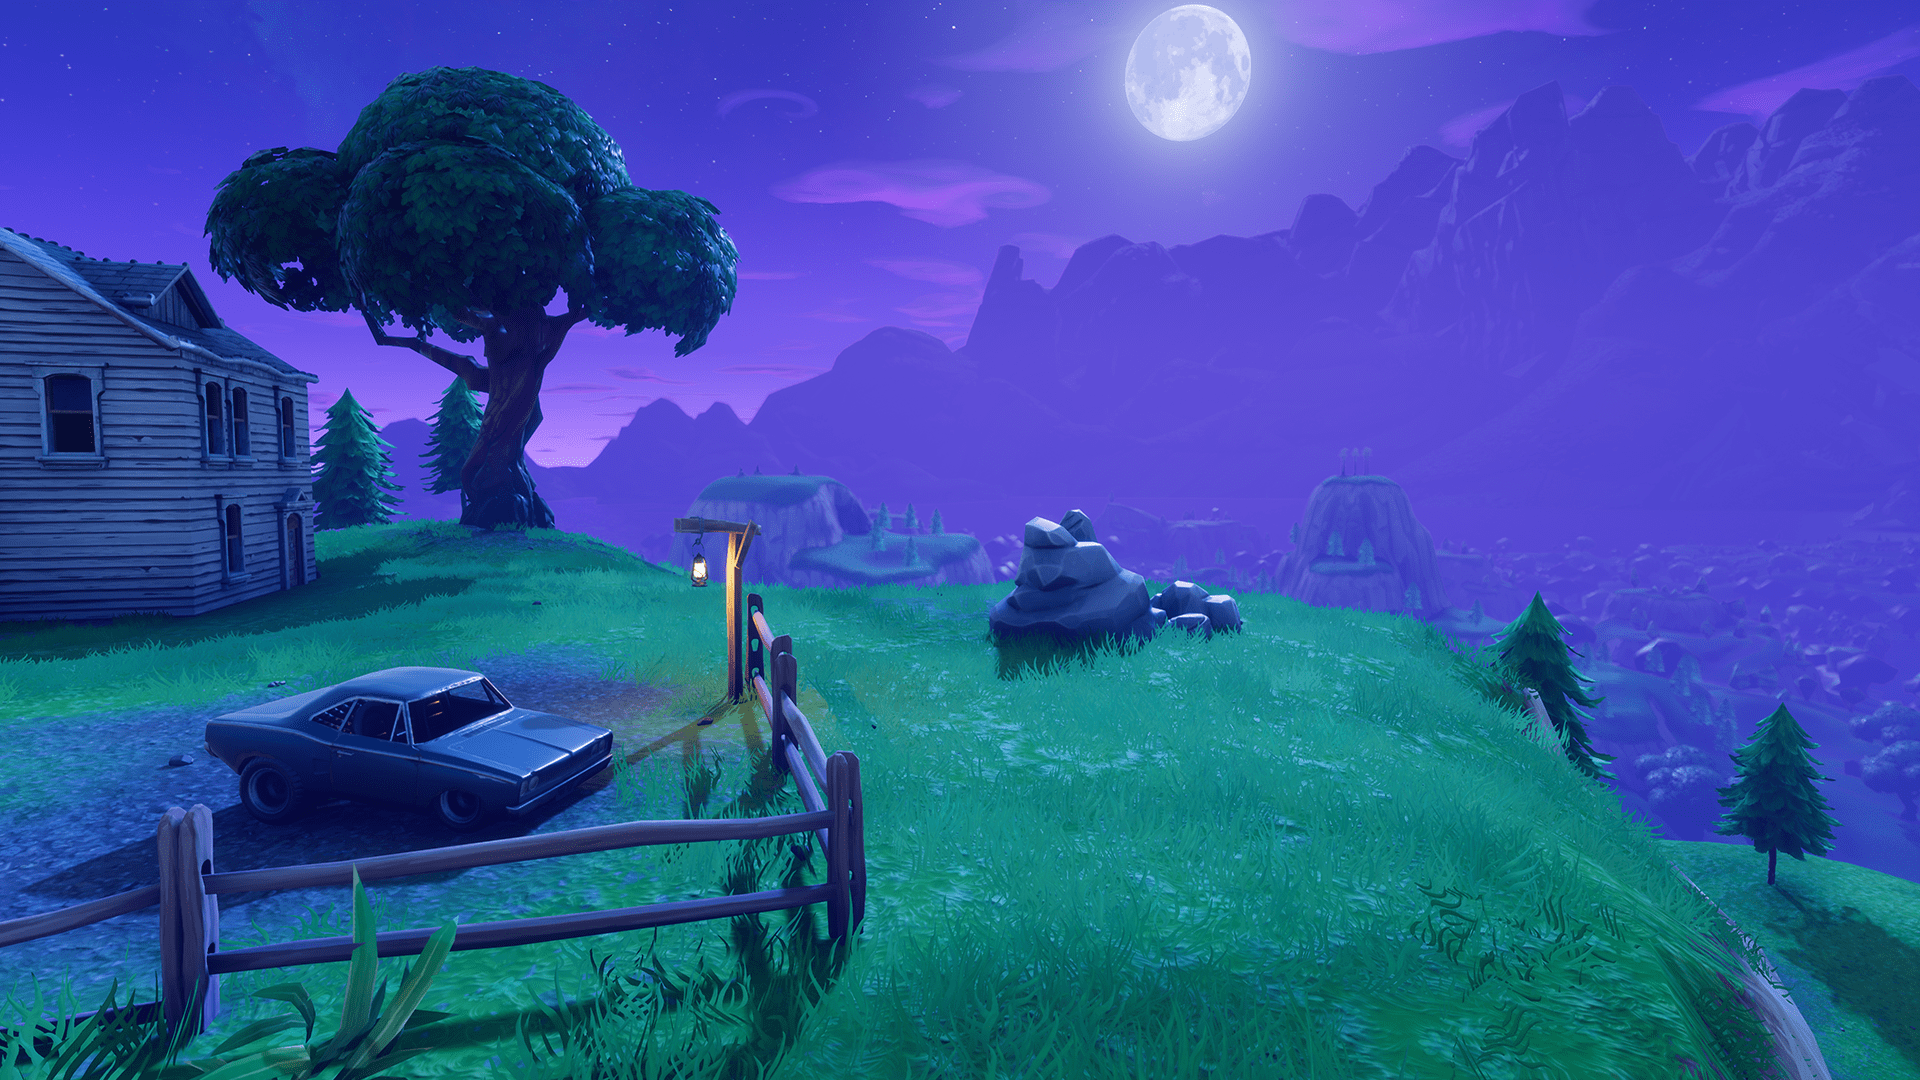 Fortnite HD Wallpaper and Background Image stmed.net in 2020